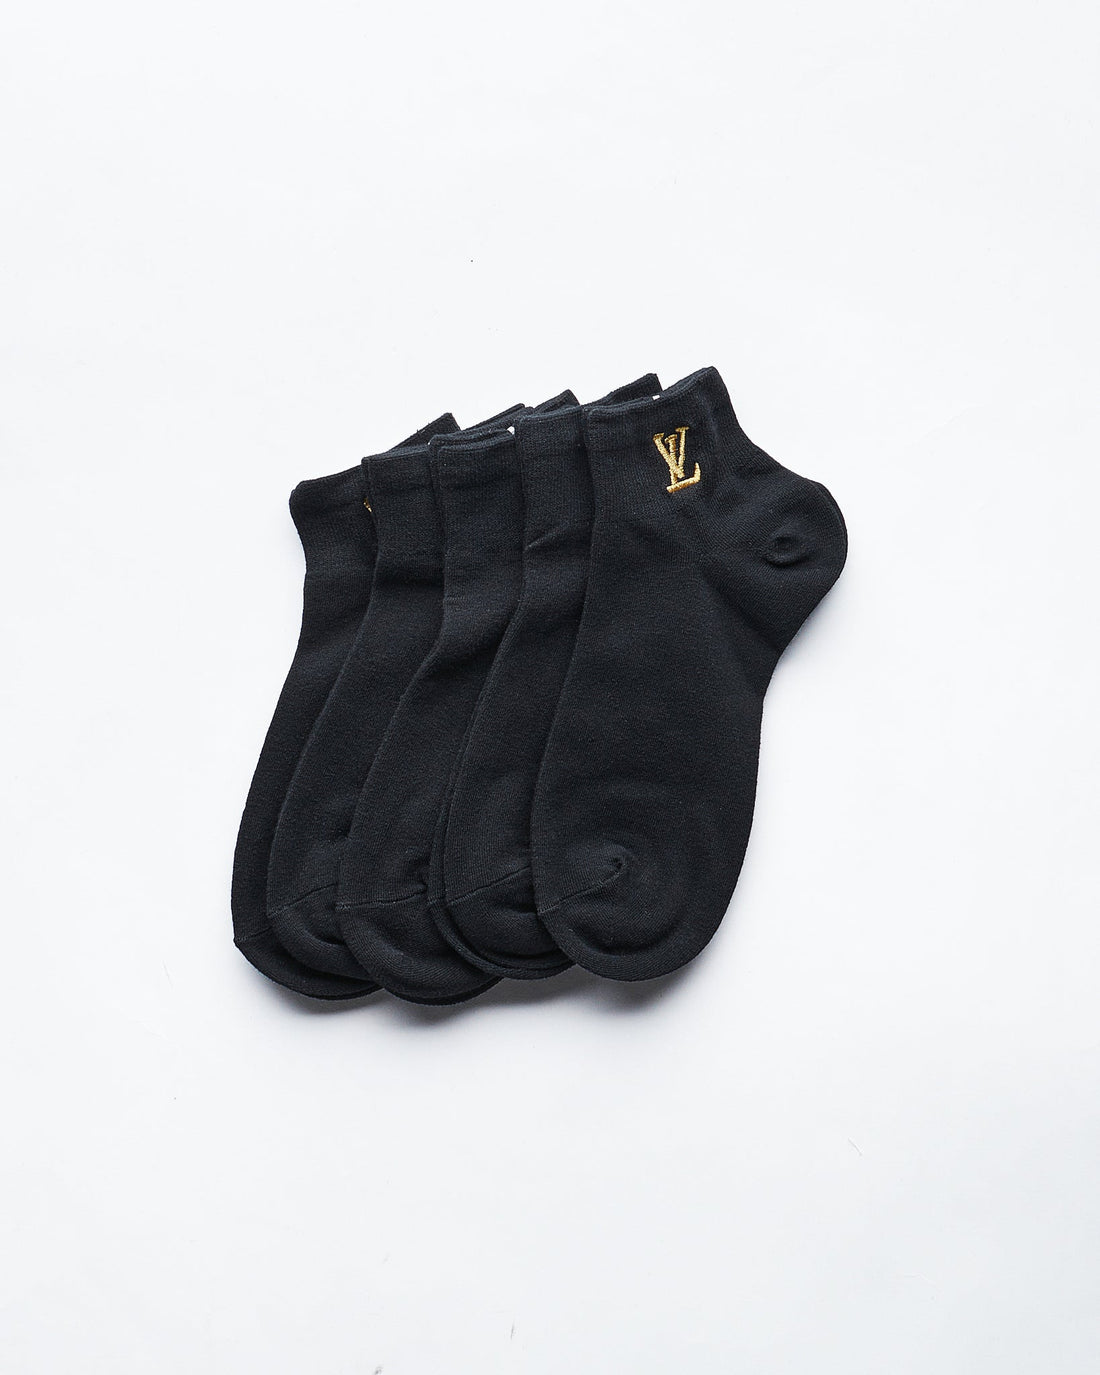 MOI OUTFIT-Gold Logo Embroidered 5 Pairs Quarter Socks 15.90